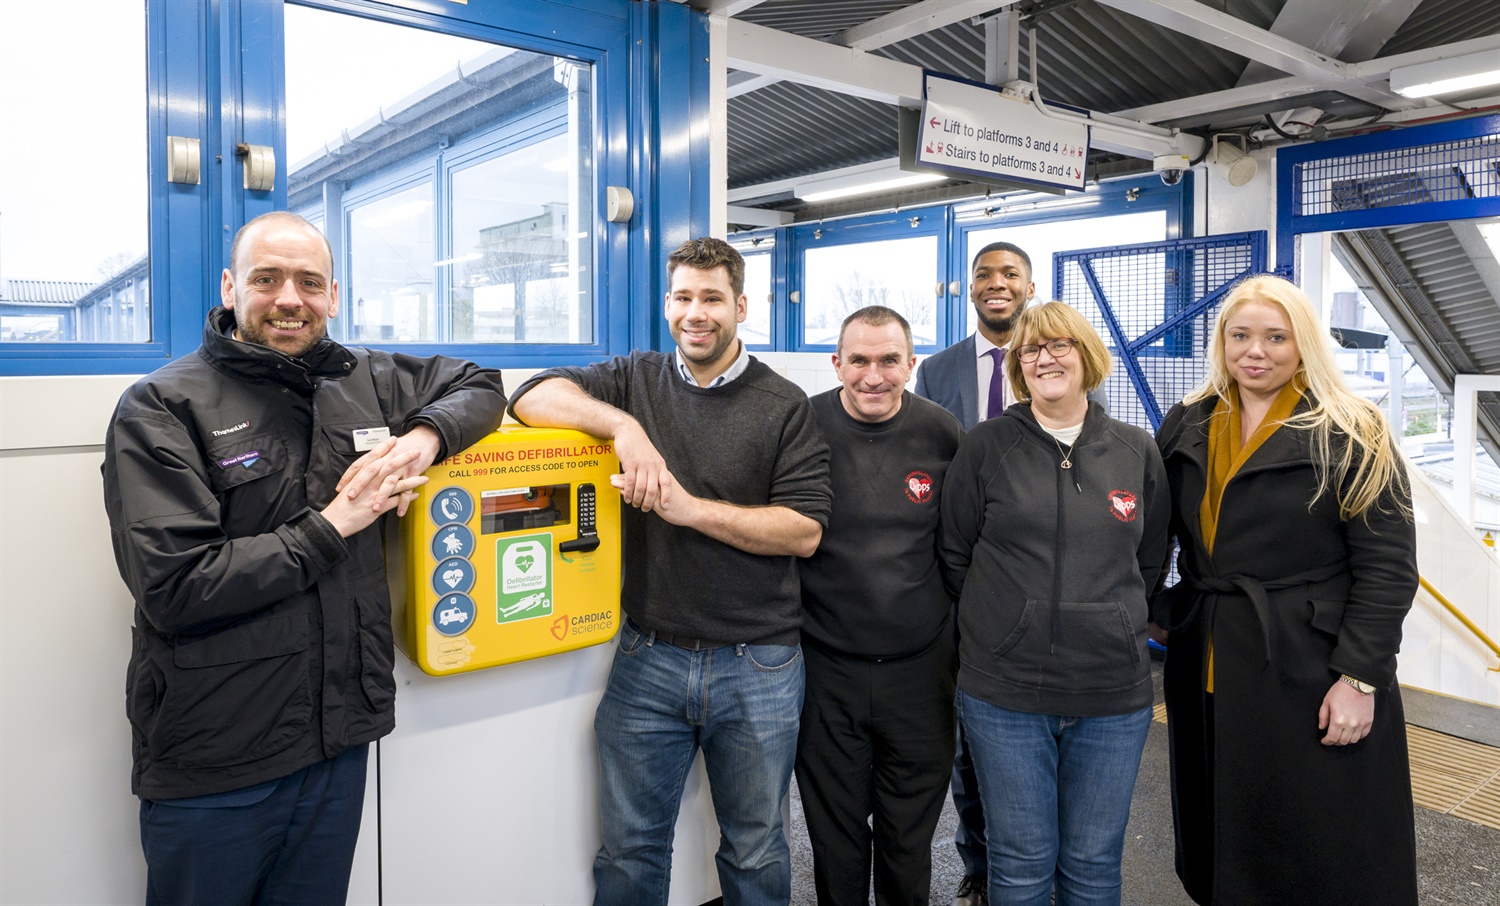 GTR start roll out of 200 more defibrillators in stations